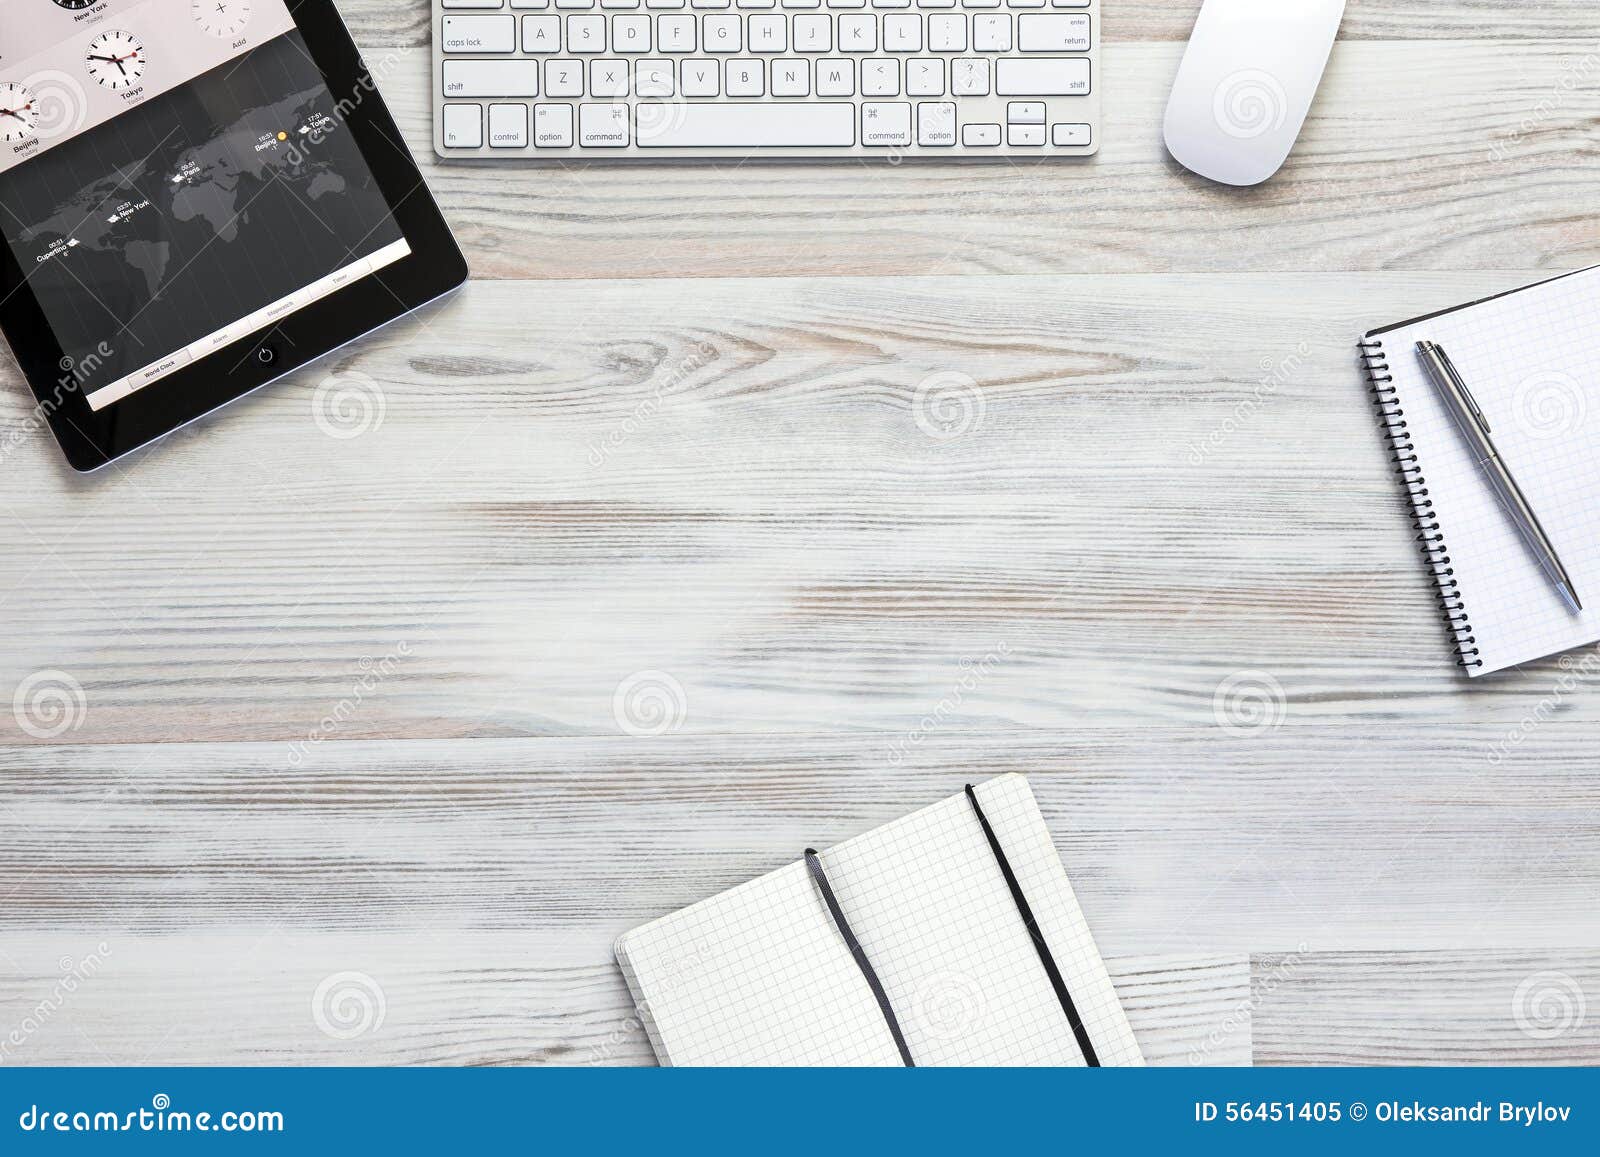 Blank Office Desk Background With Copy Space For Stock 